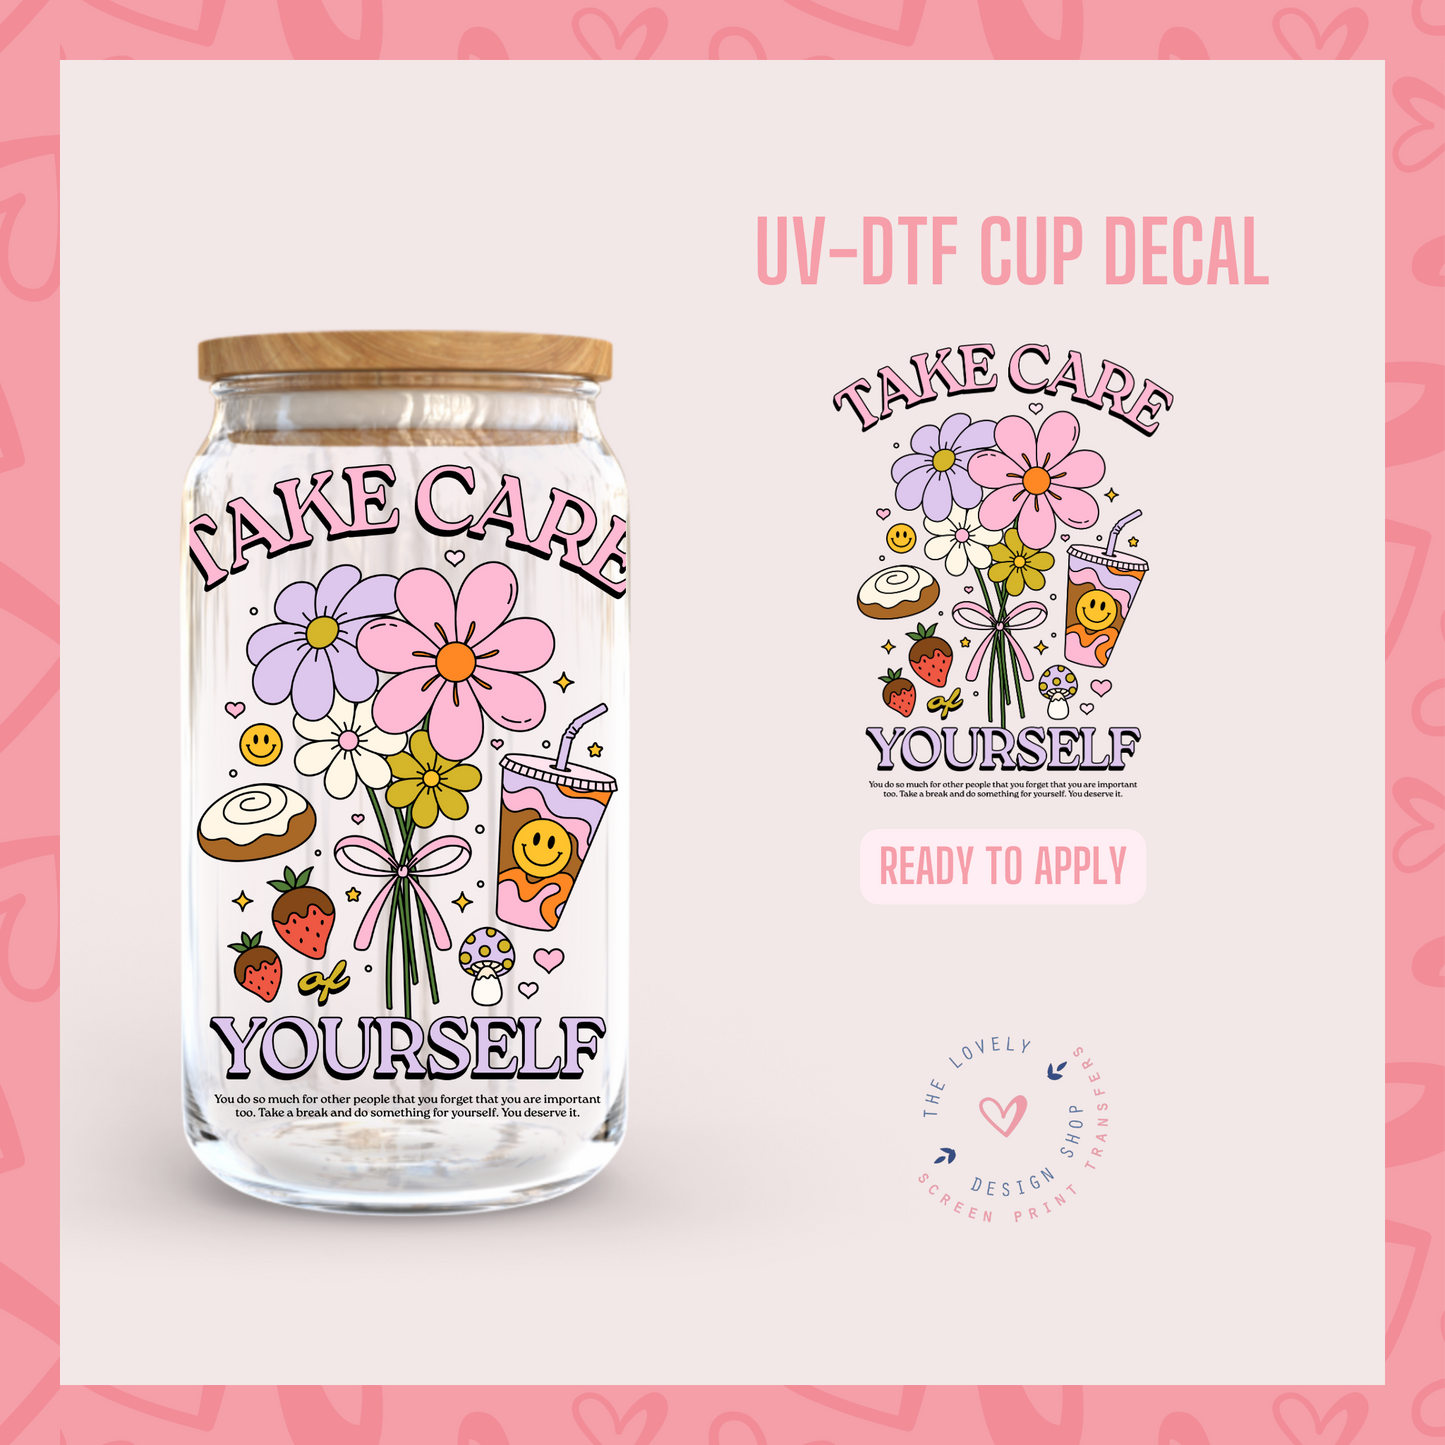 Take Care Of Yourself - UV DTF Cup Decal (Ready to Ship) Feb 27